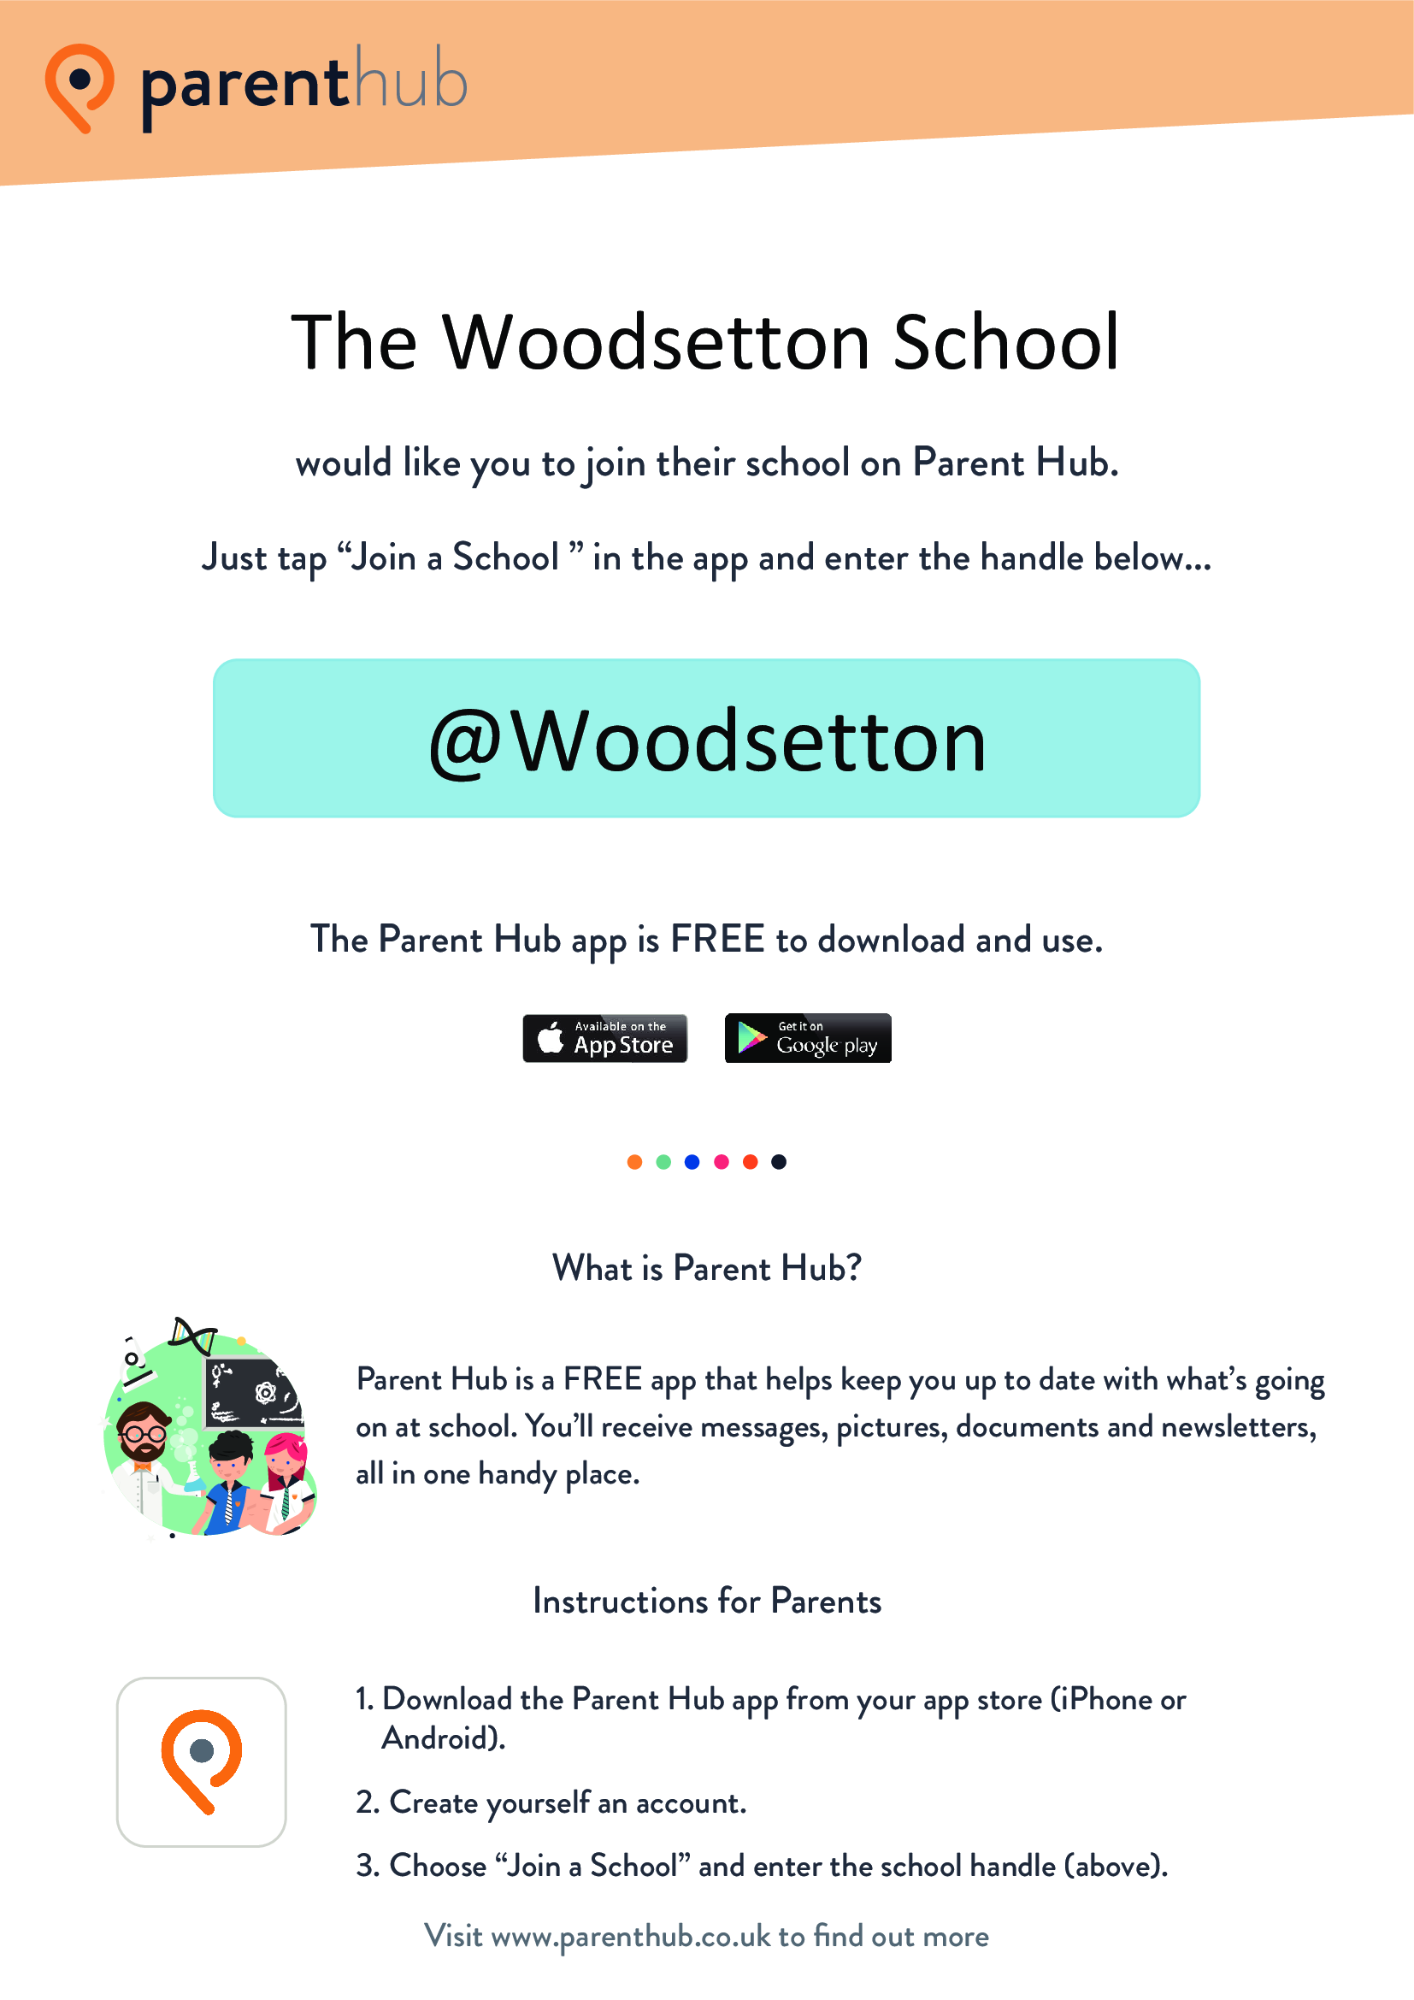 The Woodsetton School would like you to join their parent hub, use the links below to download